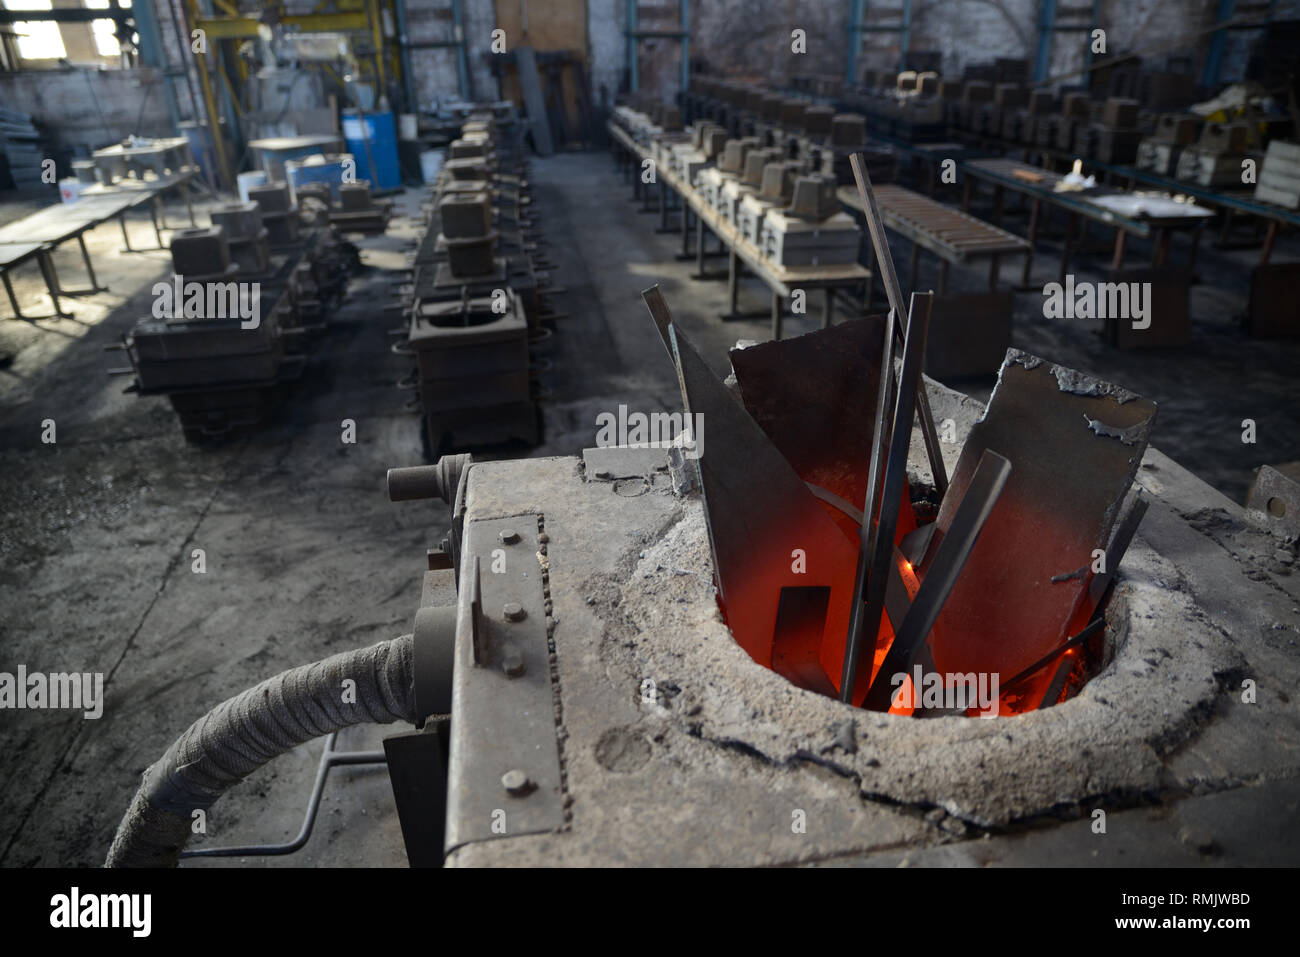 scrap steel melts down in an induction furnace at a small foundry Stock Photo